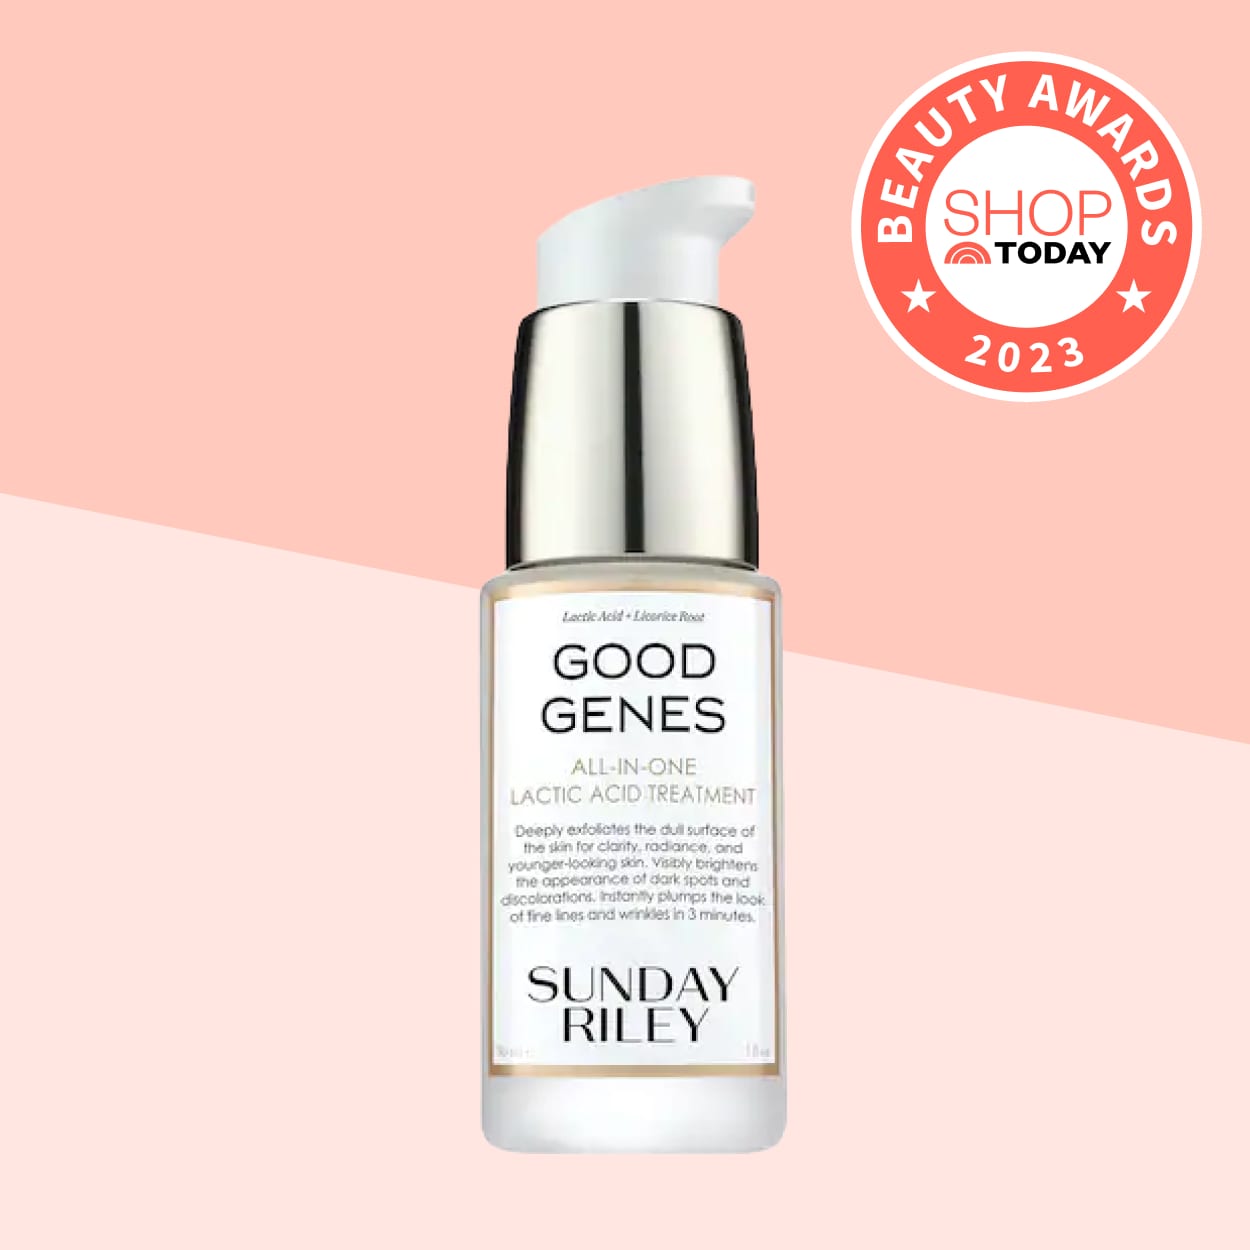 32 best skincare products of 2023: Shop TODAY beauty awards